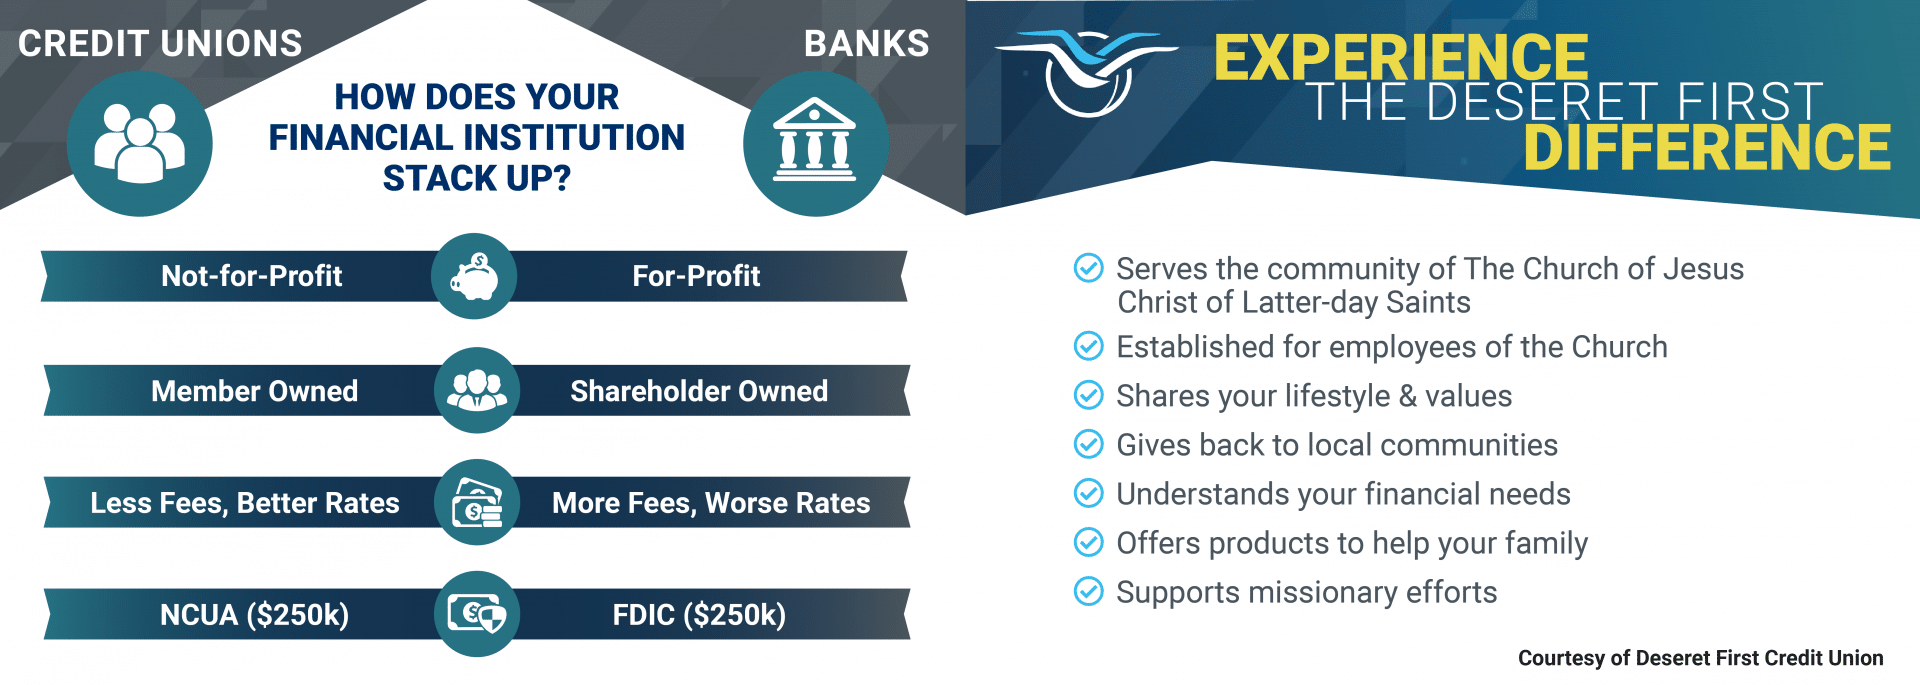 Credit Unions vs Banks Infographic. Credit Unions: not-for-profit, member owned, fewer fees, better rates, NCUA ($250K); Banks: for-profit, shareholder owned, more fees, worse rates, FDIC ($250K). The Deseret First Difference: Serves the LDS community, established for church employees, shares your lifestyle & values, gives back to the community, understands your financial needs, offers products to help your family, supports missionary efforts.